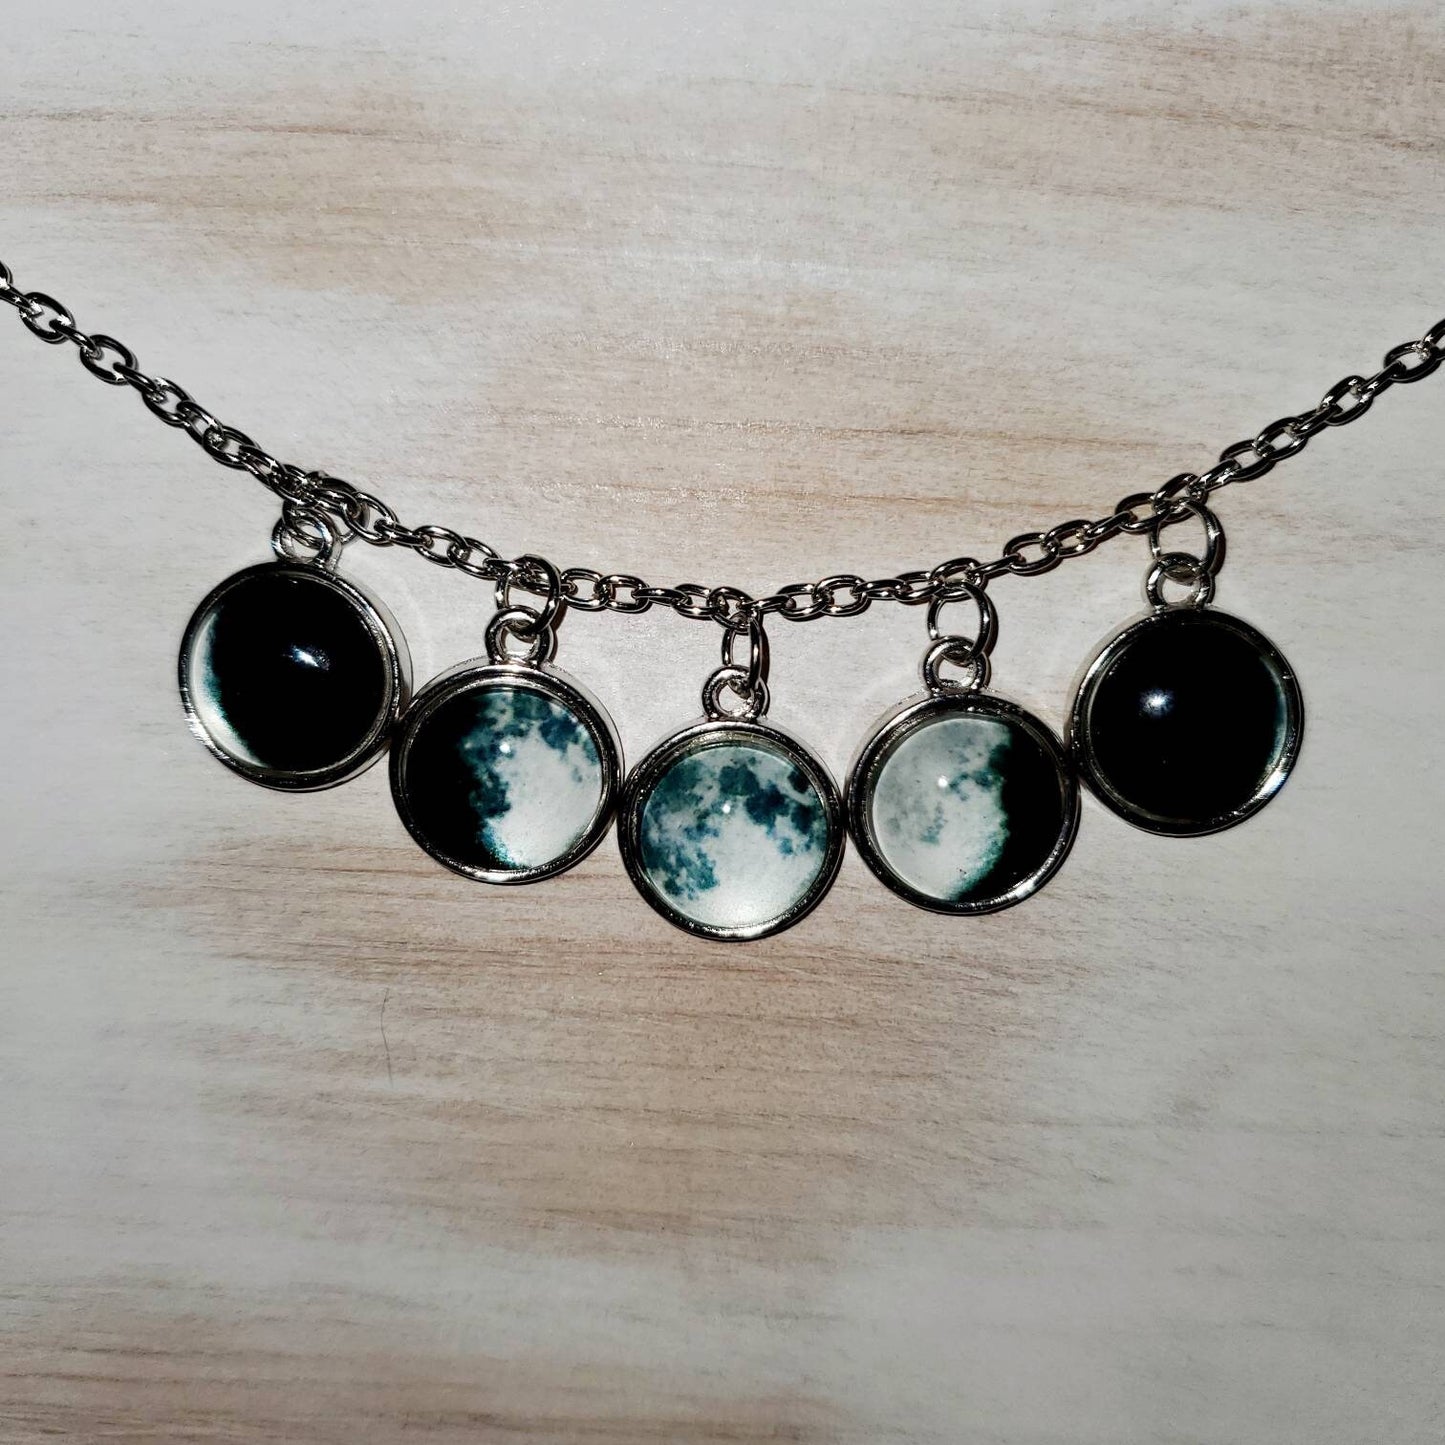 Full Moon Cycle Necklace